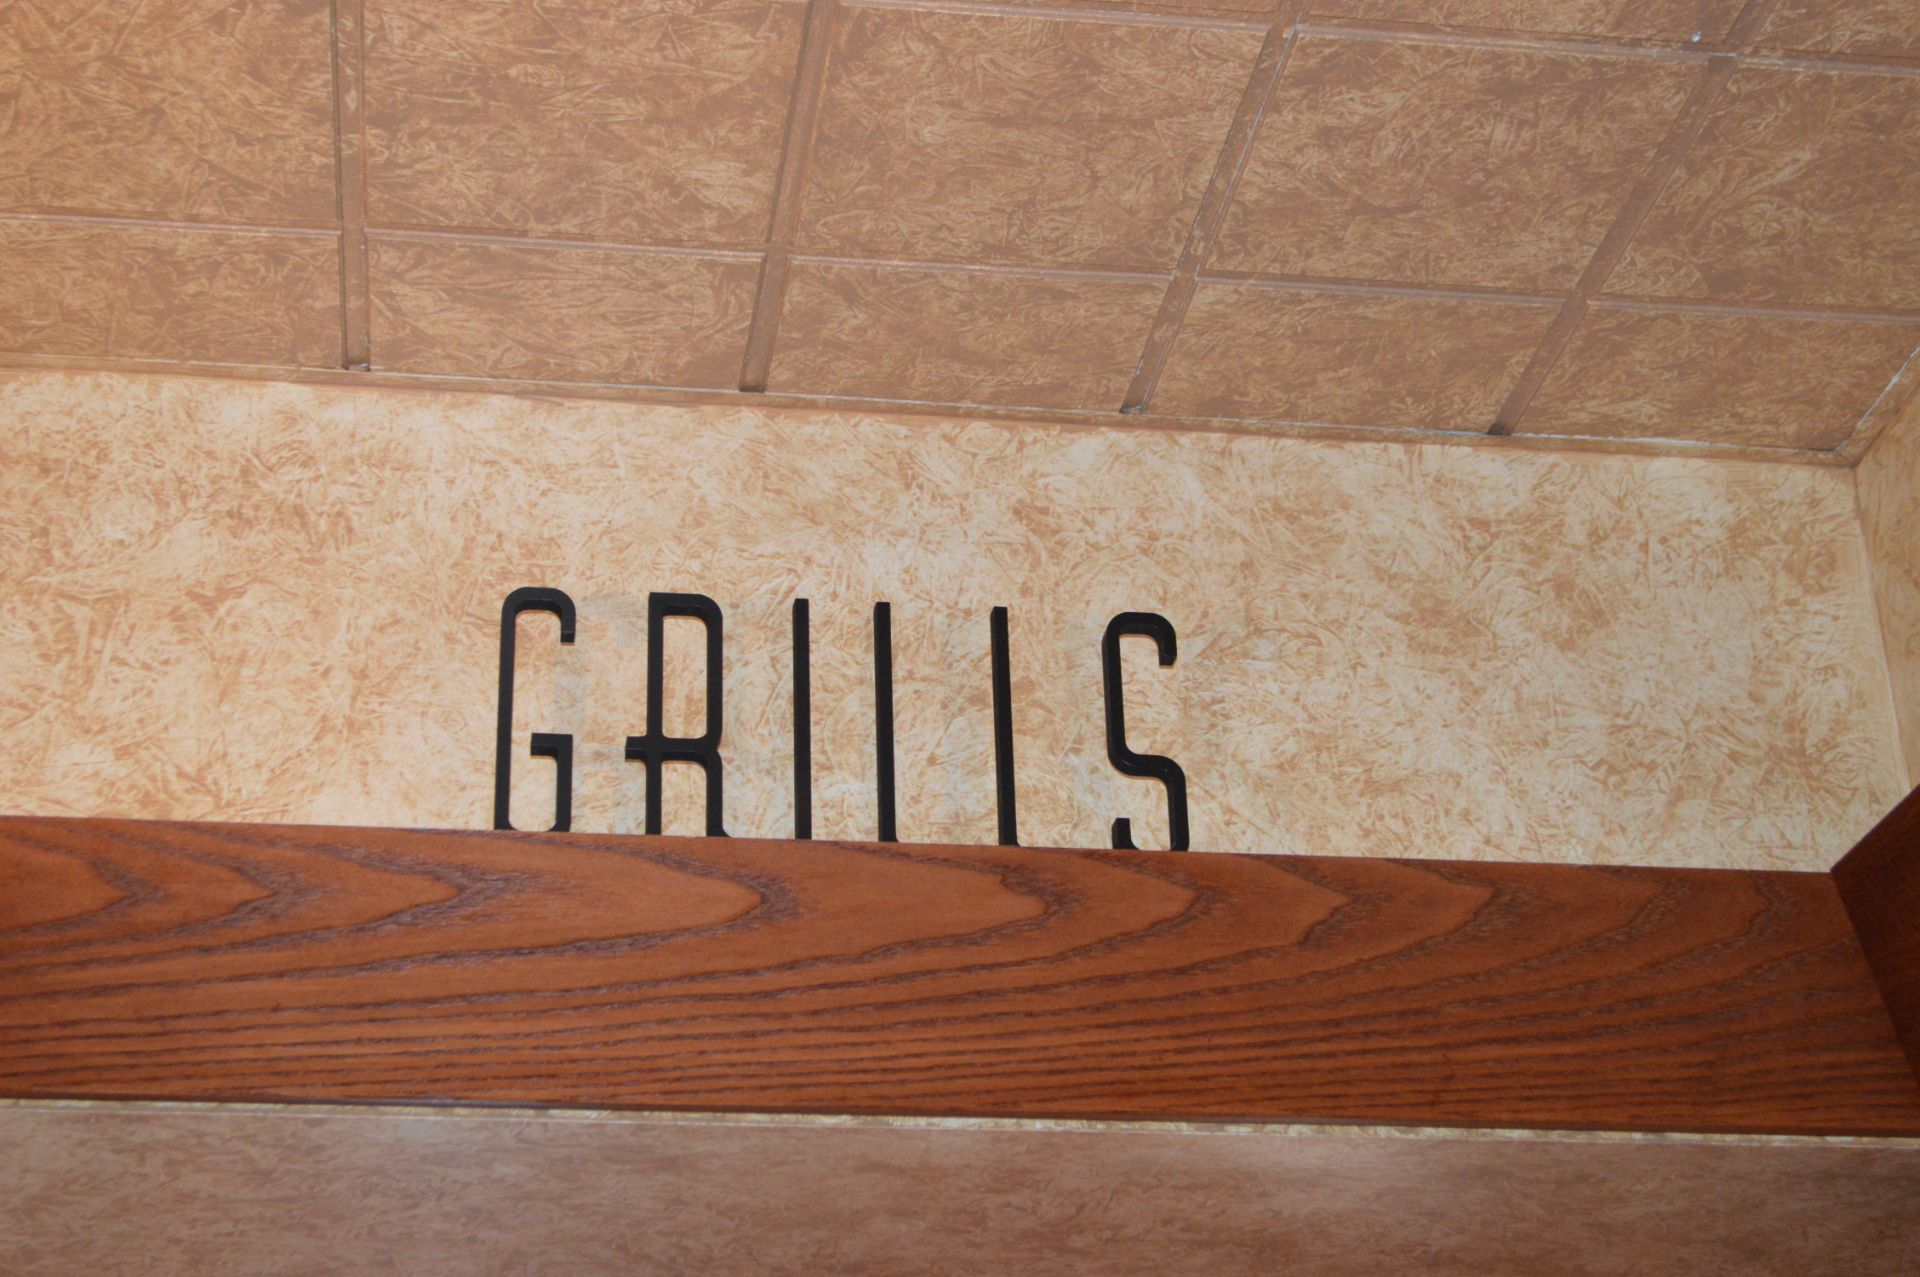 40 x Wooden Signs Suitable For Restaurants, Cafes, Bistros etc - Includes Grills, Amaretto, Penne, - Image 27 of 31